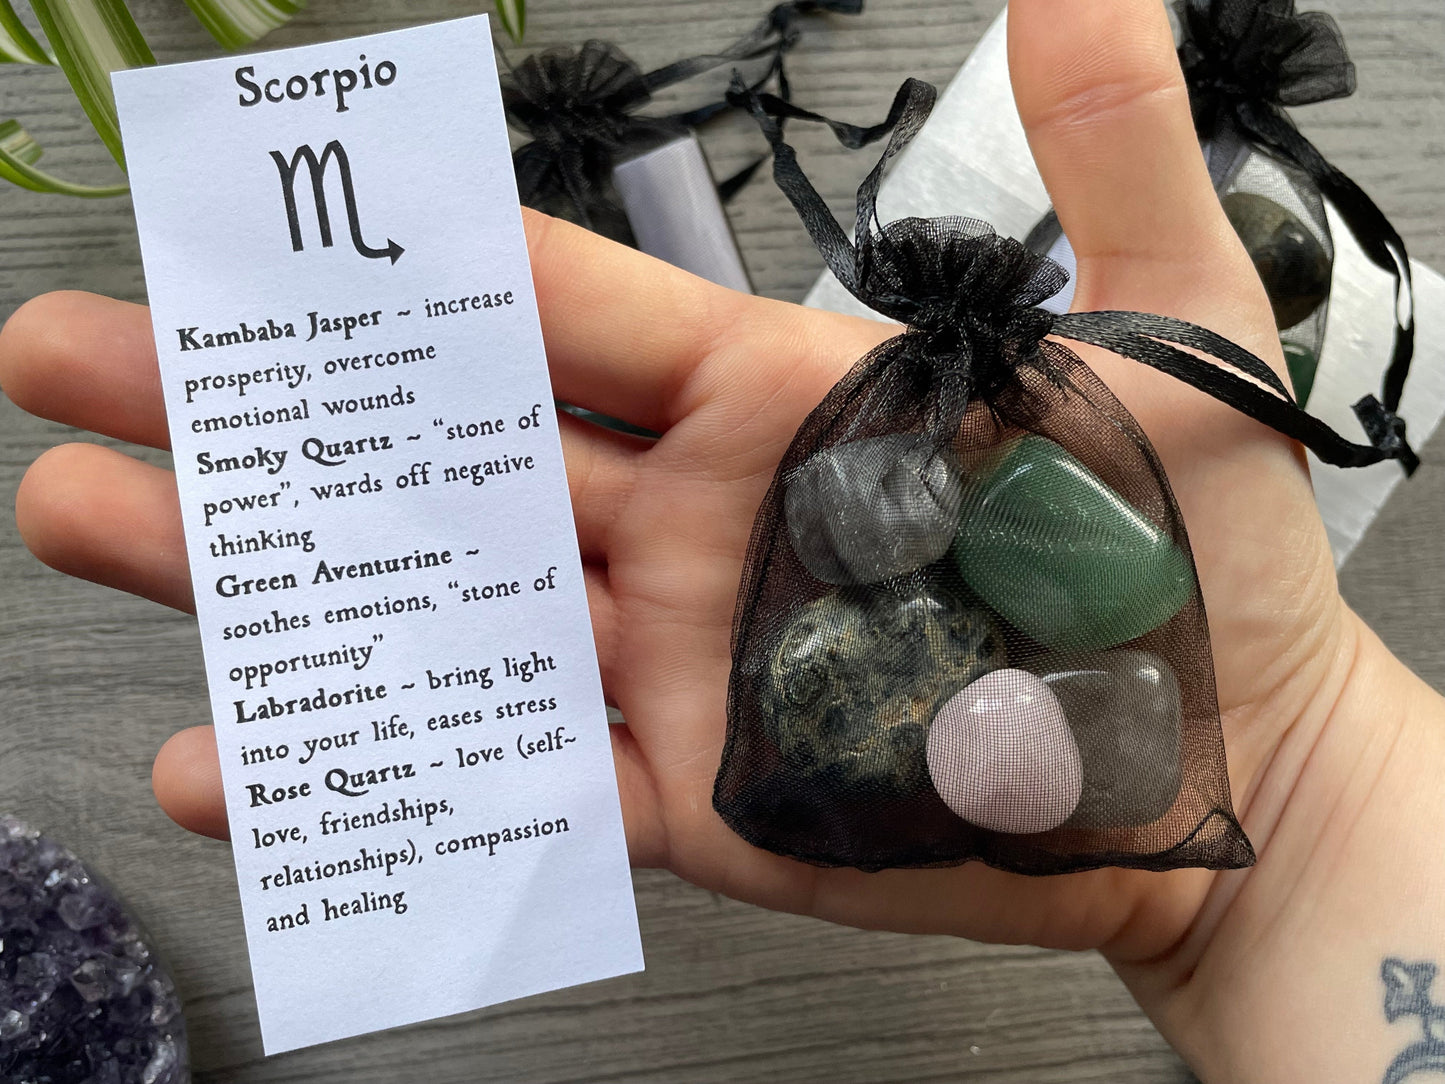 An image of a collection of tumbled stones in an organza bag. To the side is a piece of paper that describes what each tumbled stone's metaphysical properties are.